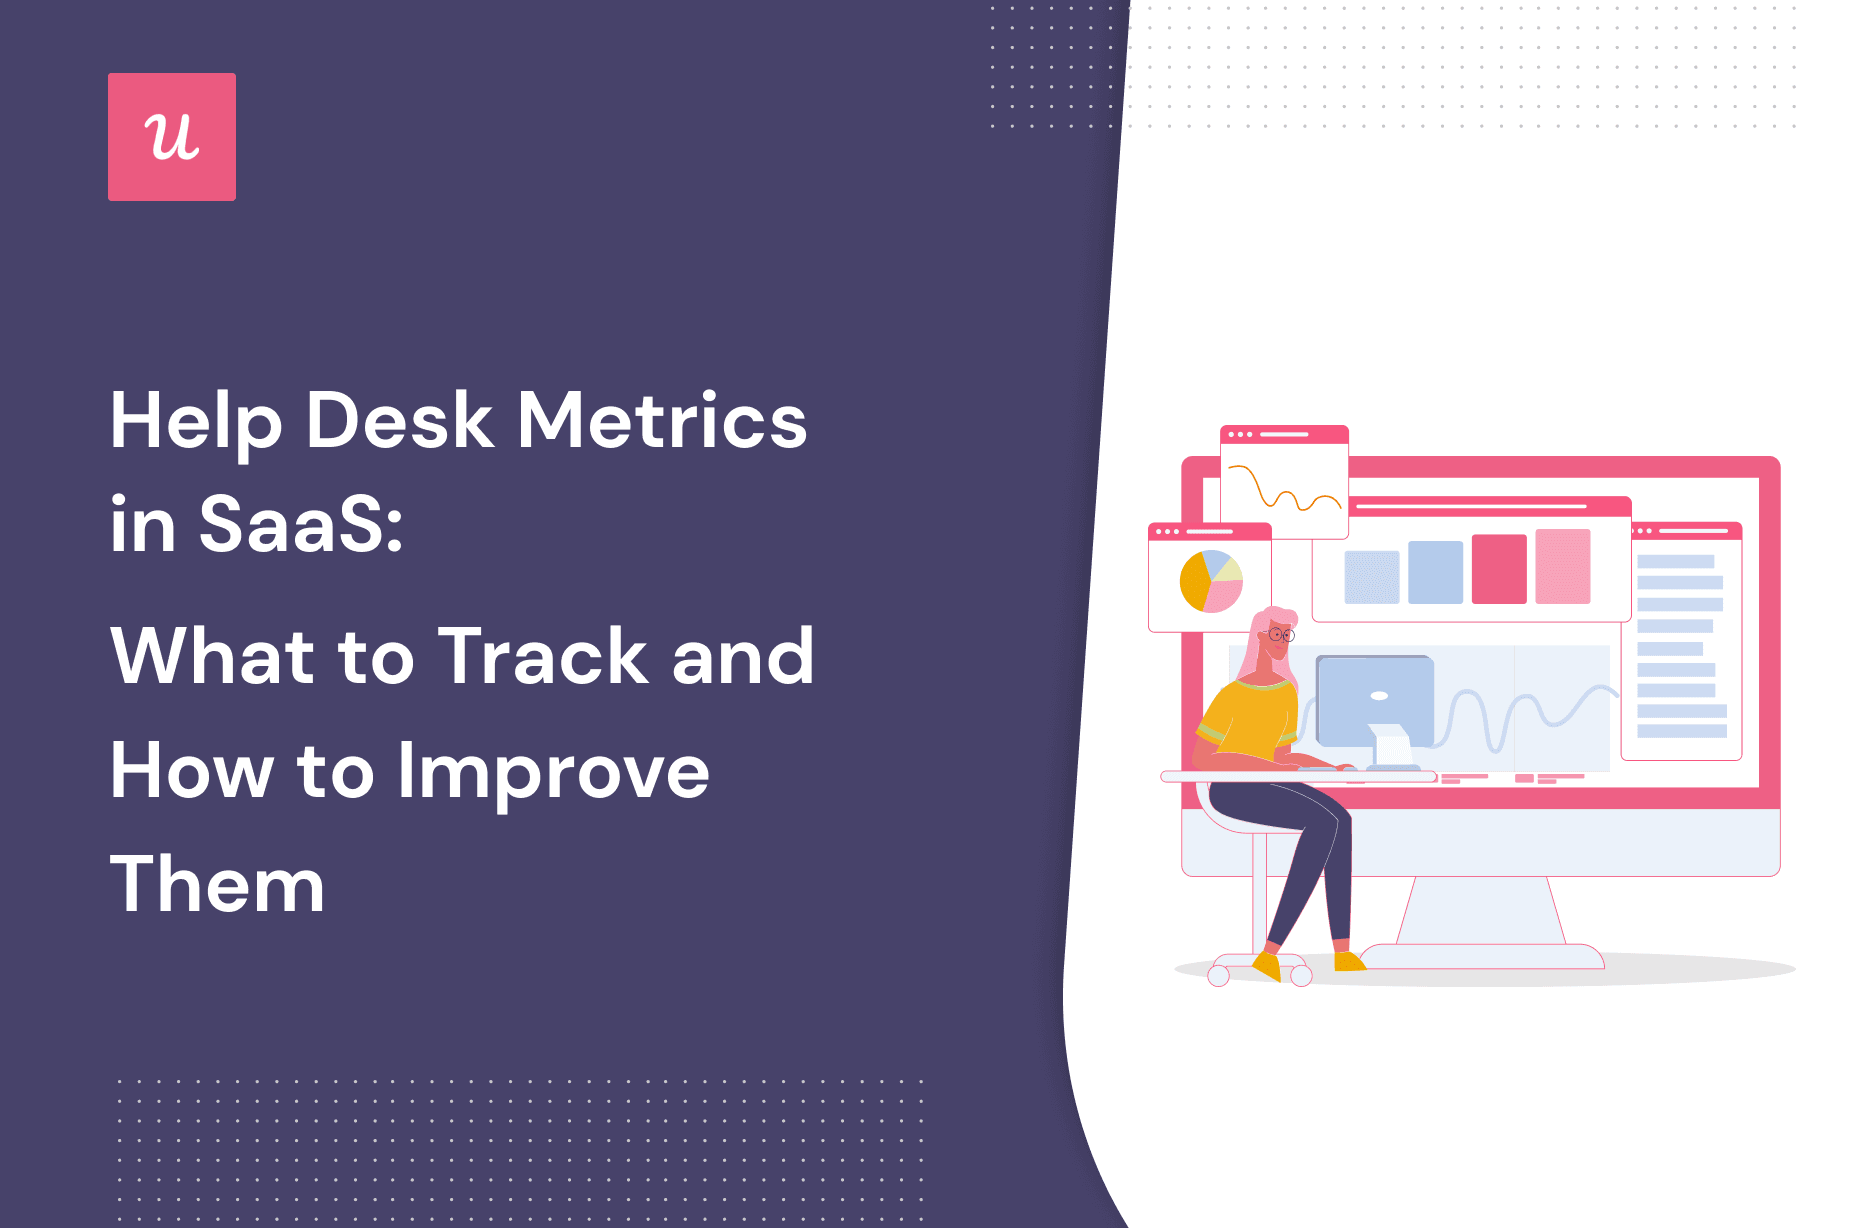 Help Desk Metrics in SaaS: What To Track and How to Improve Them